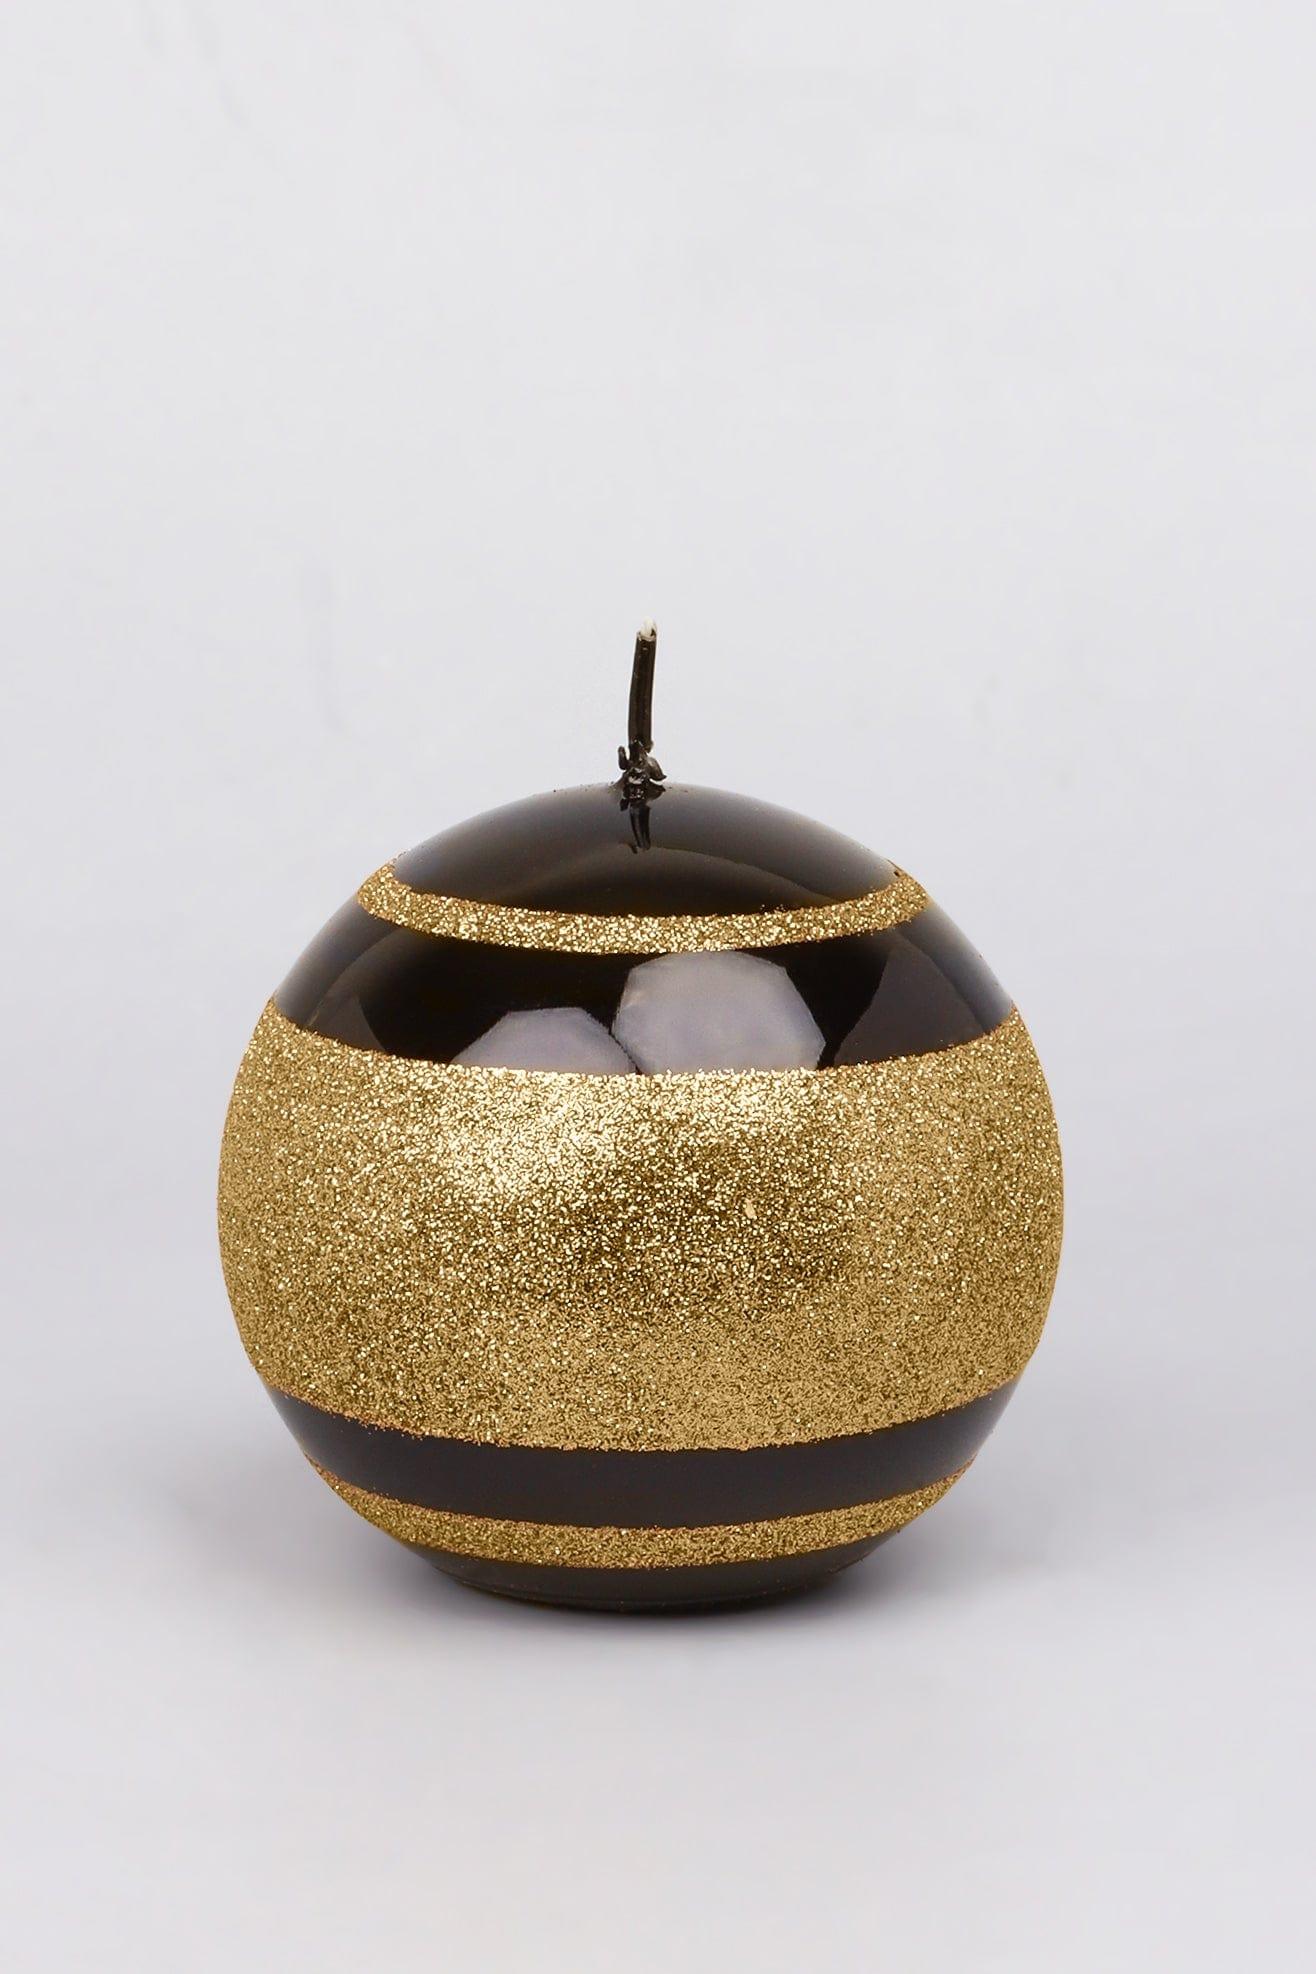 G Decor Candles & Candle Holders Black / Ball Black and Gold Glass Effect Striped Glitter Gloss Ball Pillar Candles